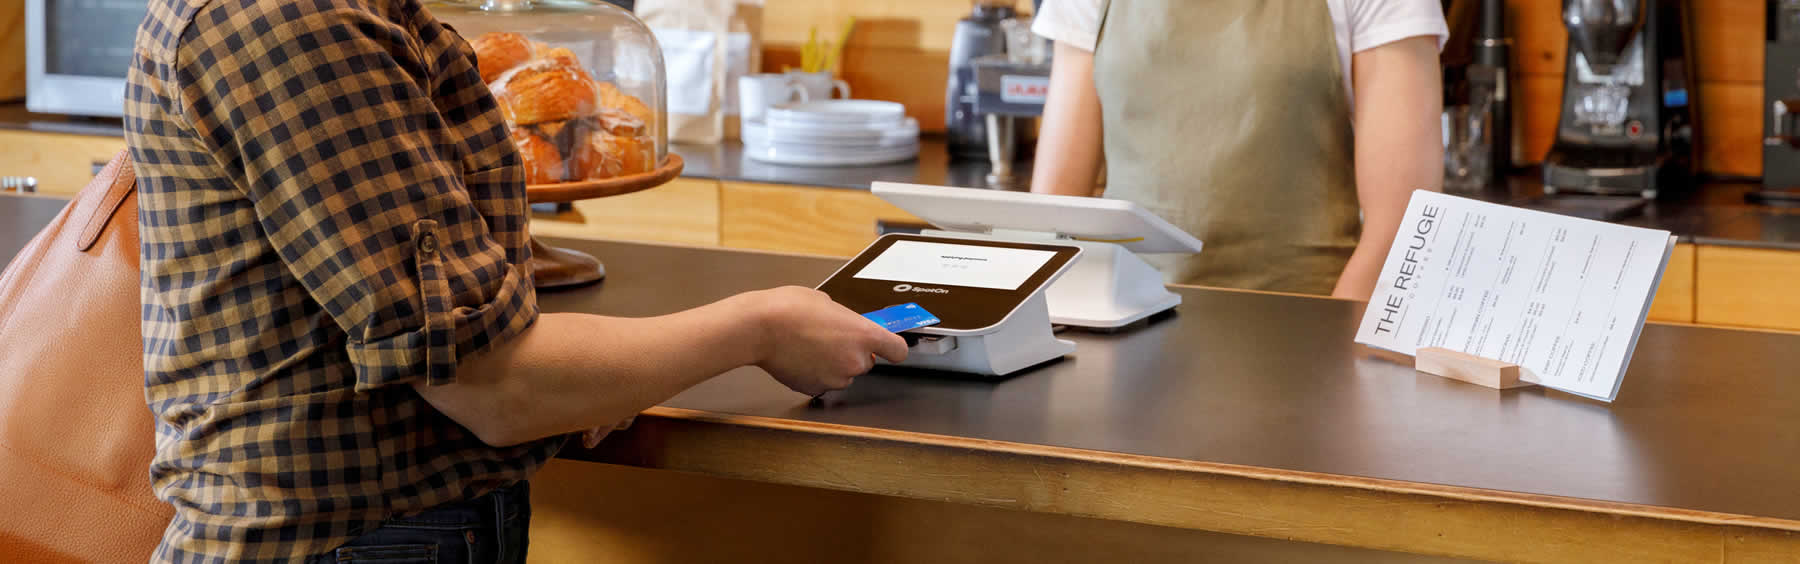 Find a great POS System for your retail store from Funds Access Inc.